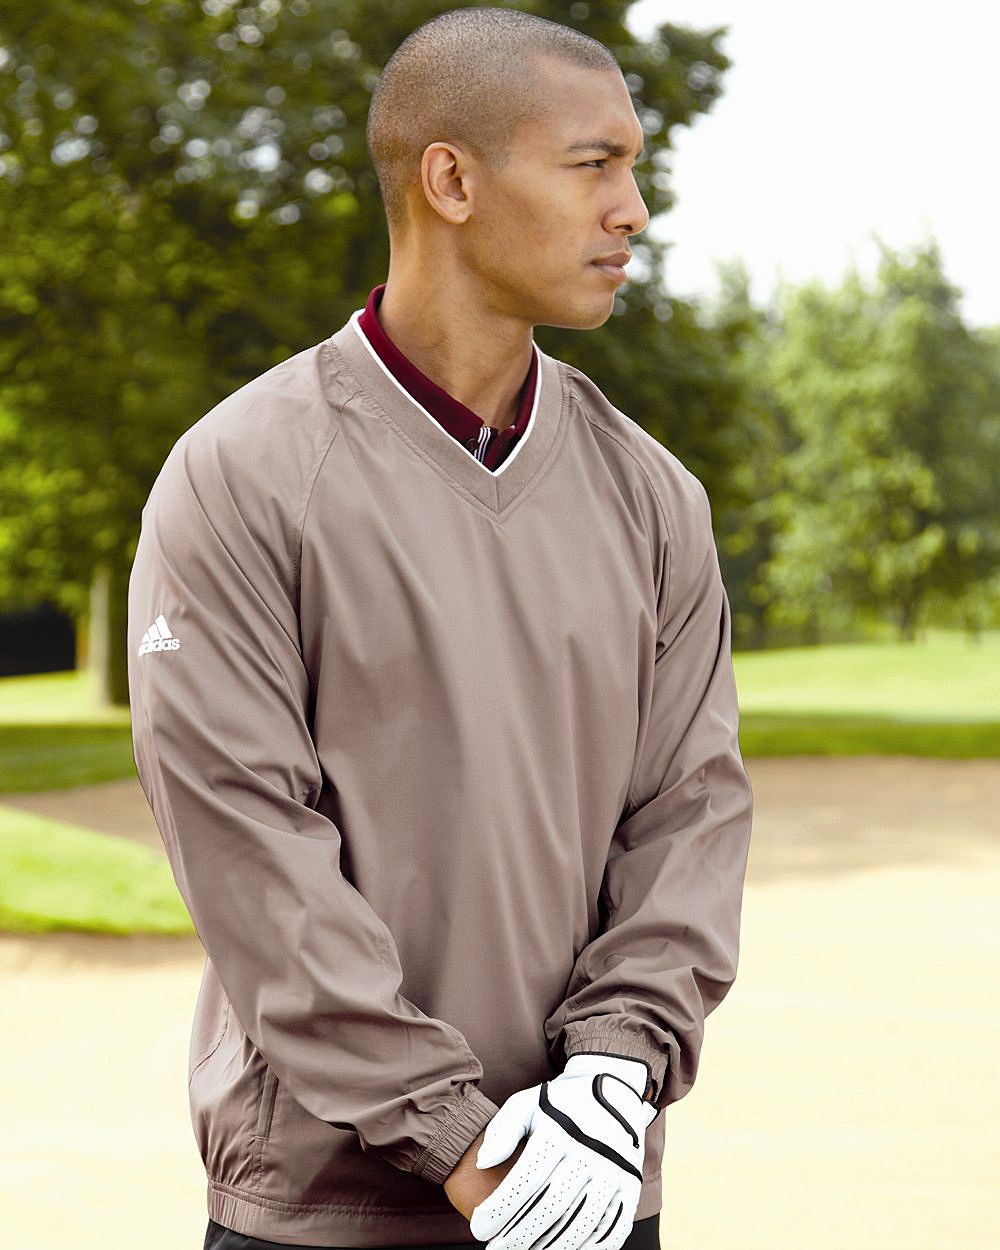 Pullover or vest - warm for maximum comfort while playing golf 